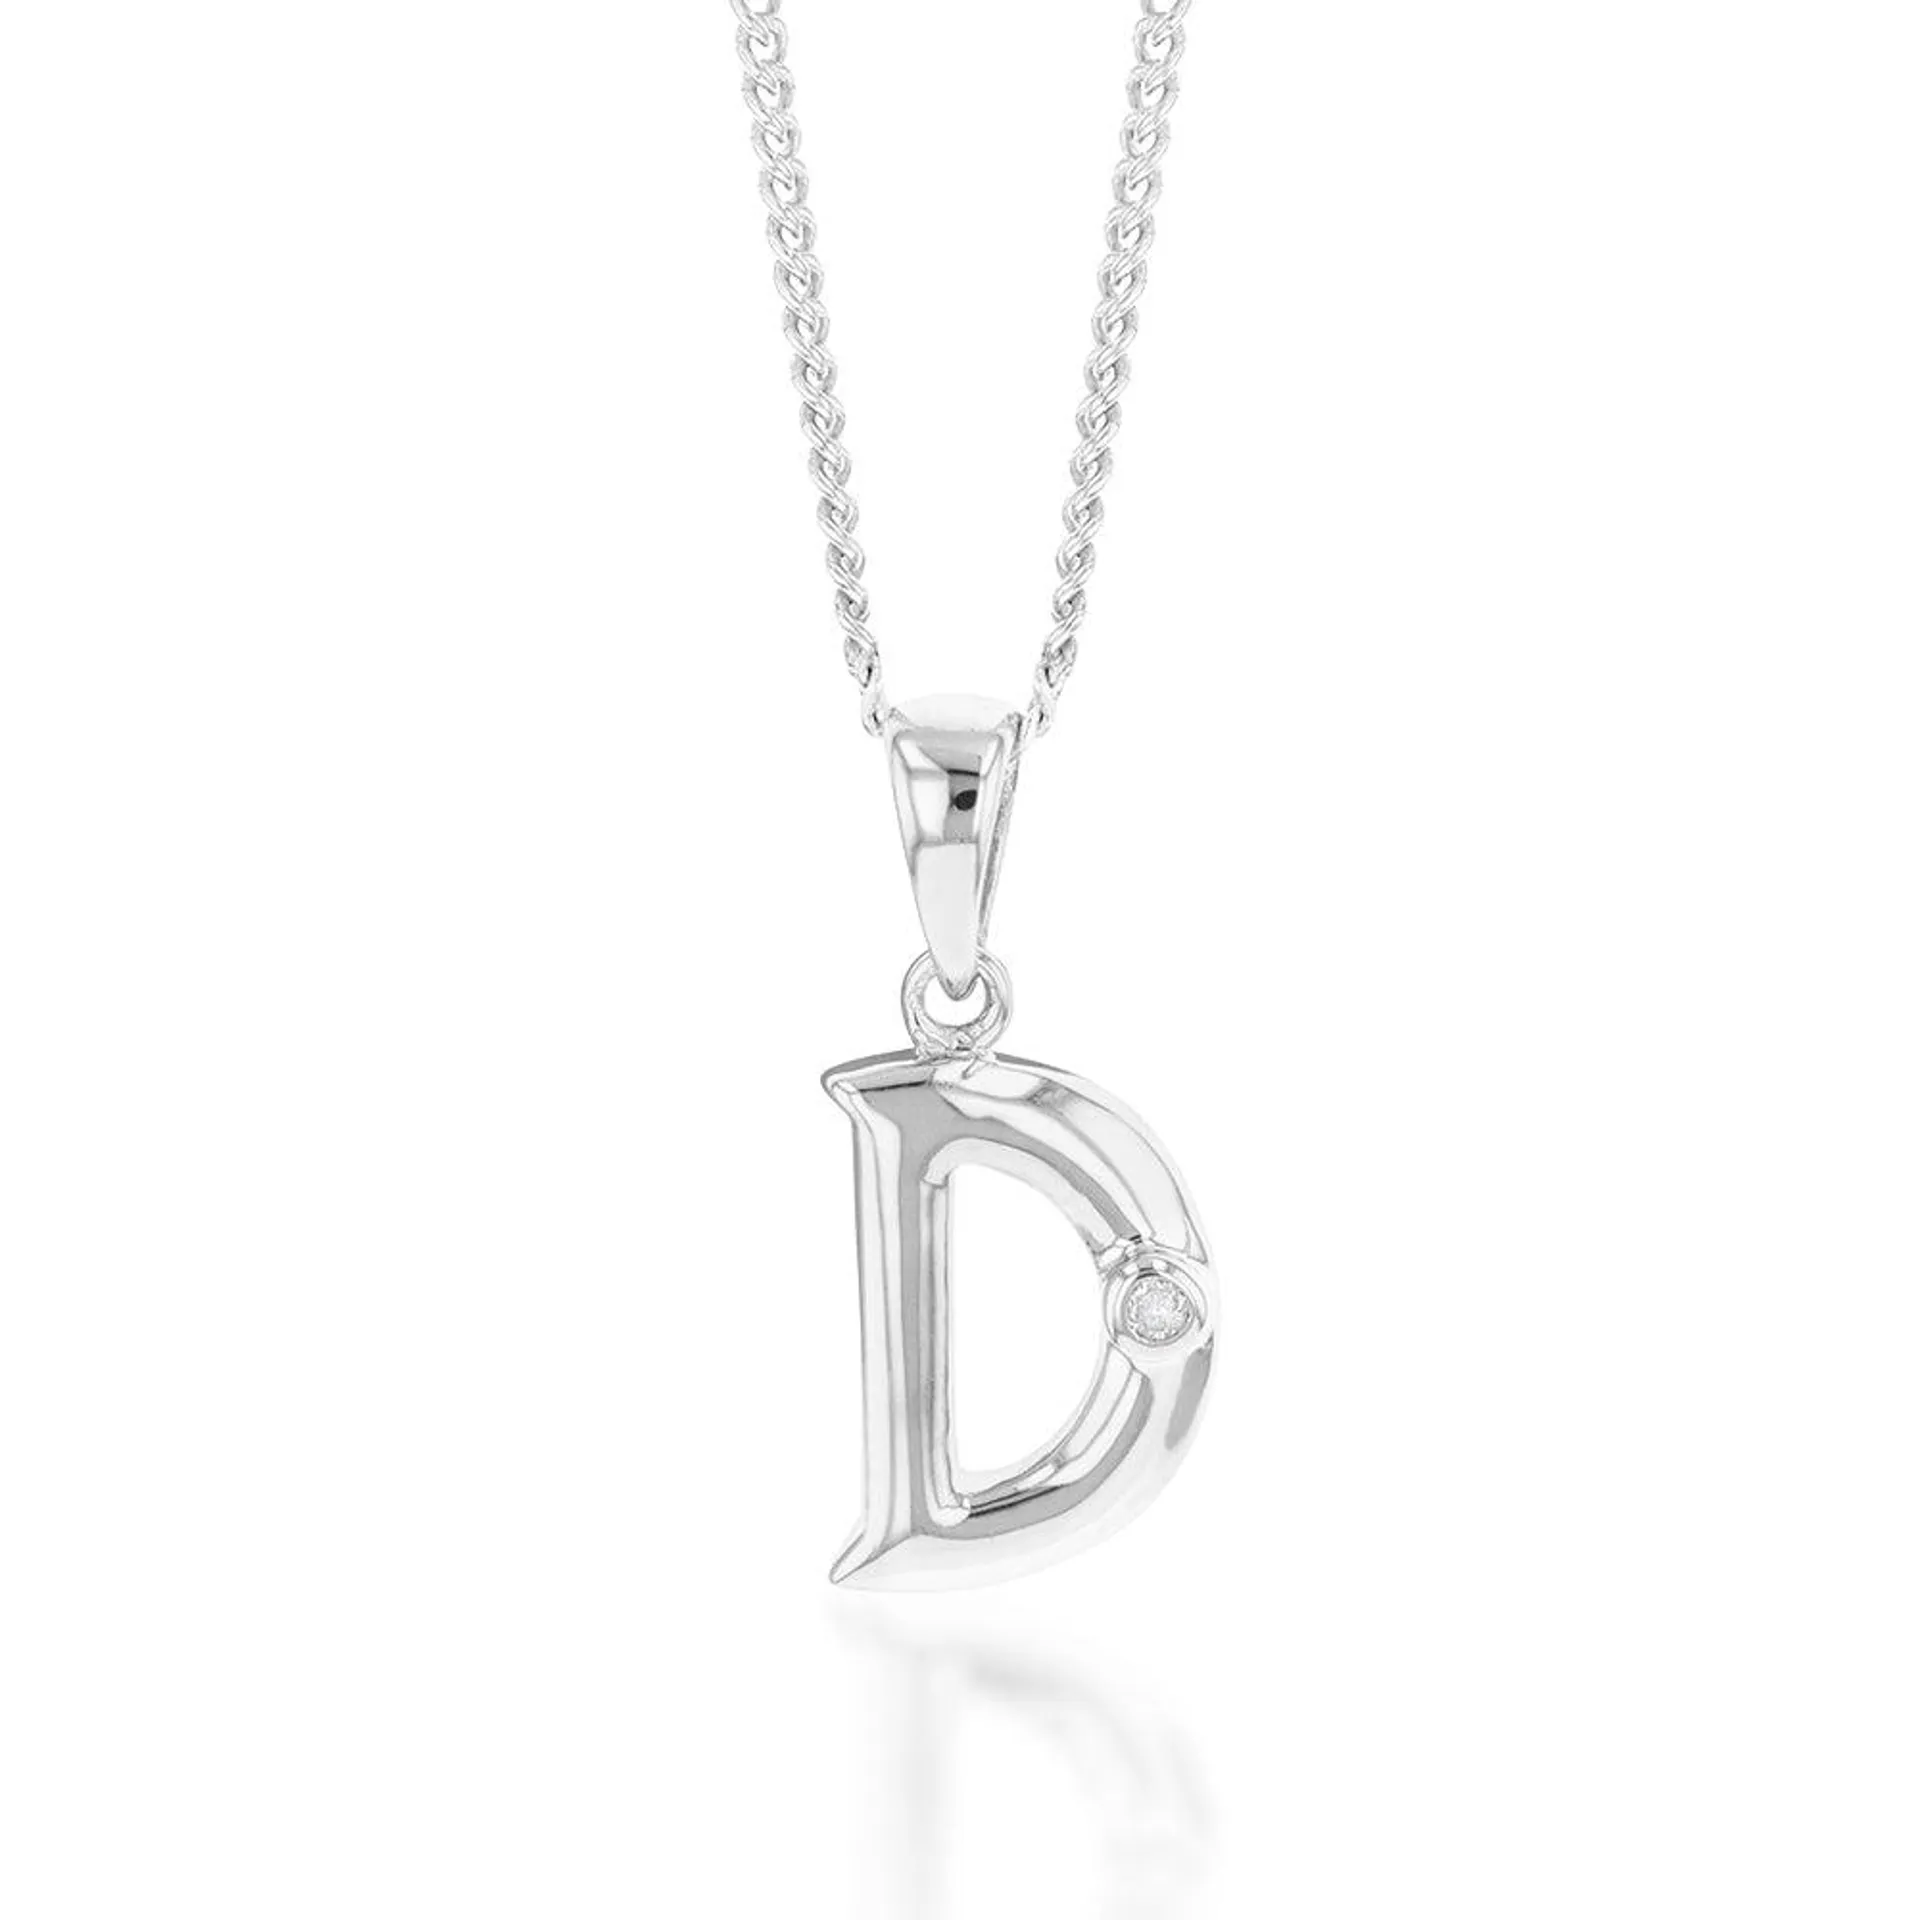 Silver Pendant Initial D set with Diamond